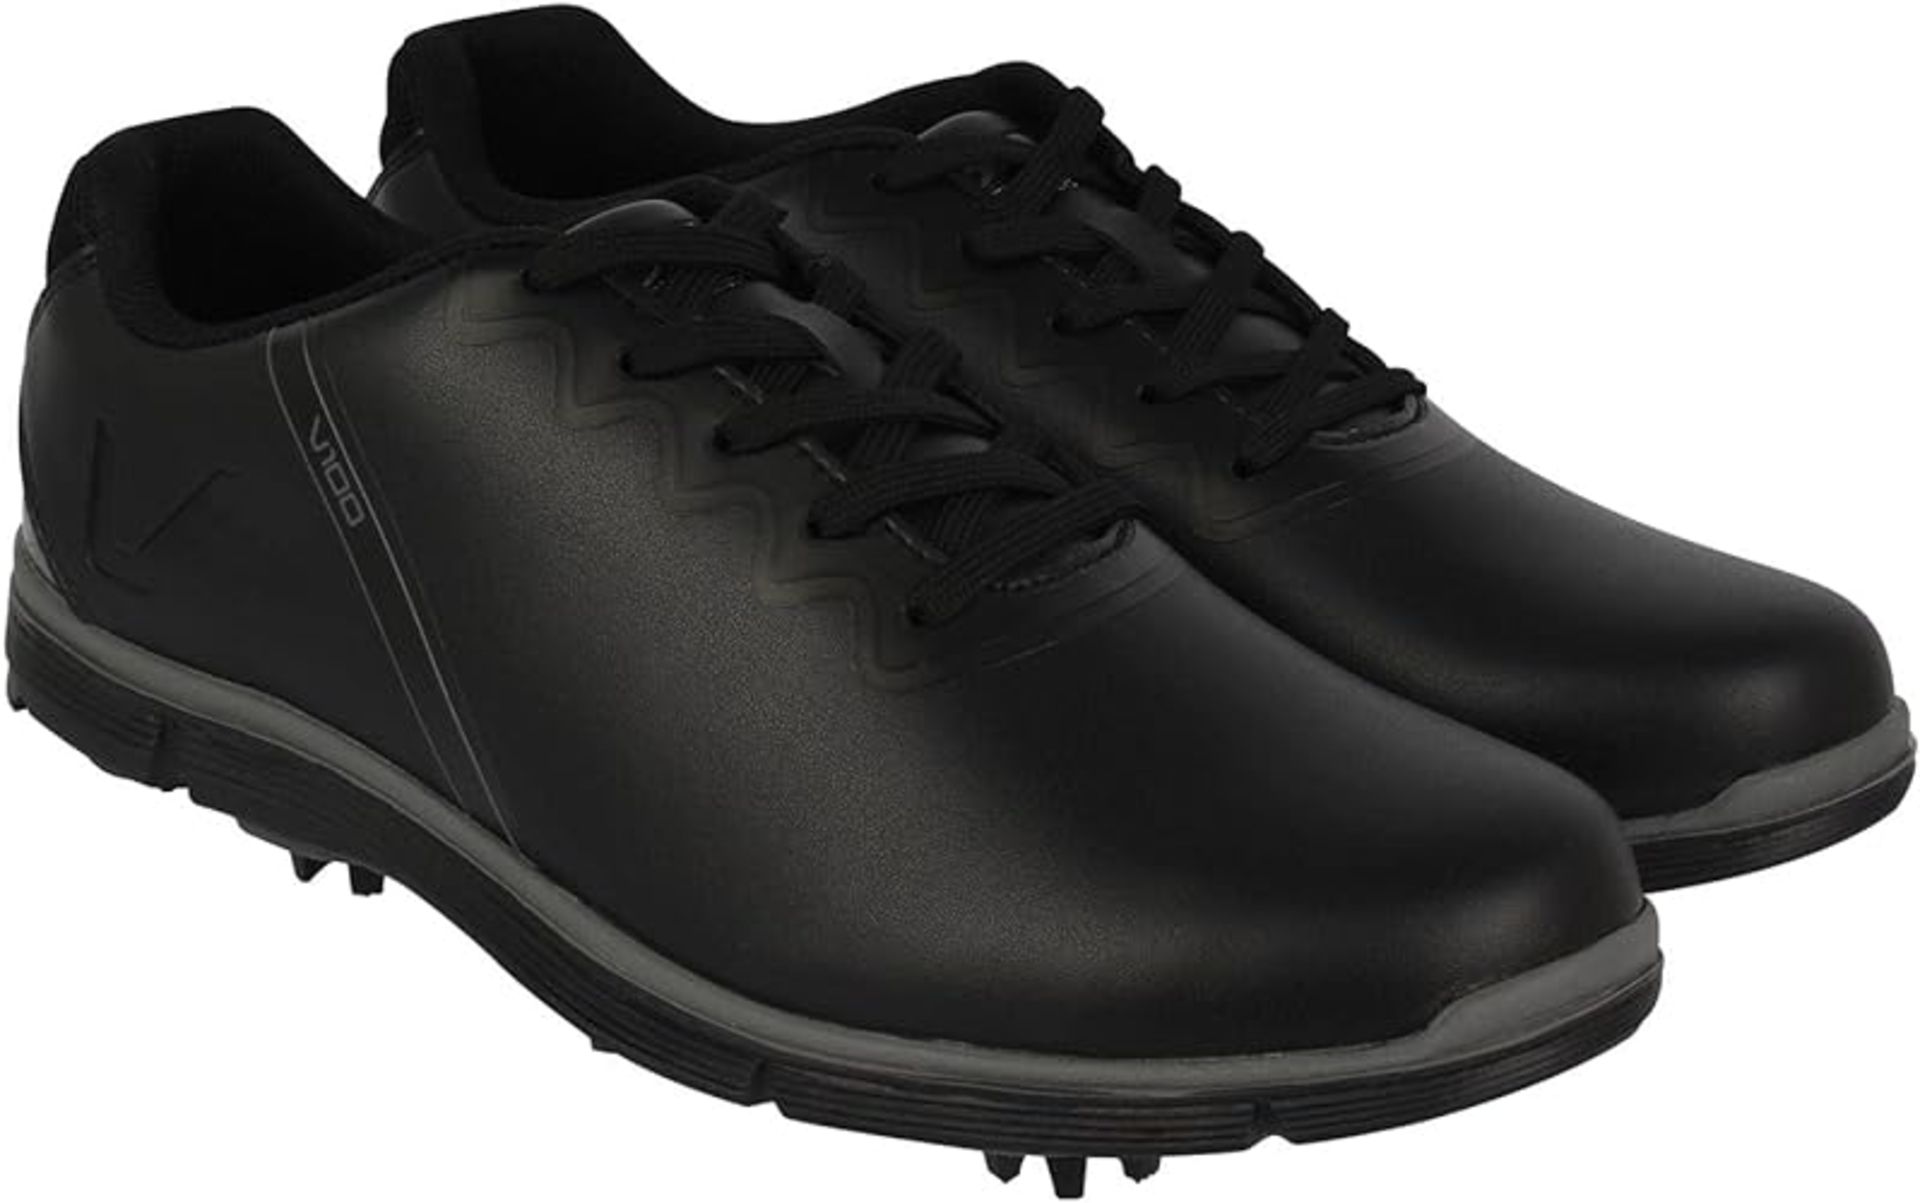 2 X BRAND NEW PAIRS OF SLAZENGER BLACK V100 PROFESSIONAL GOLF SHOES SIZE 9 RRP £89 EACH S1RA - Image 3 of 3